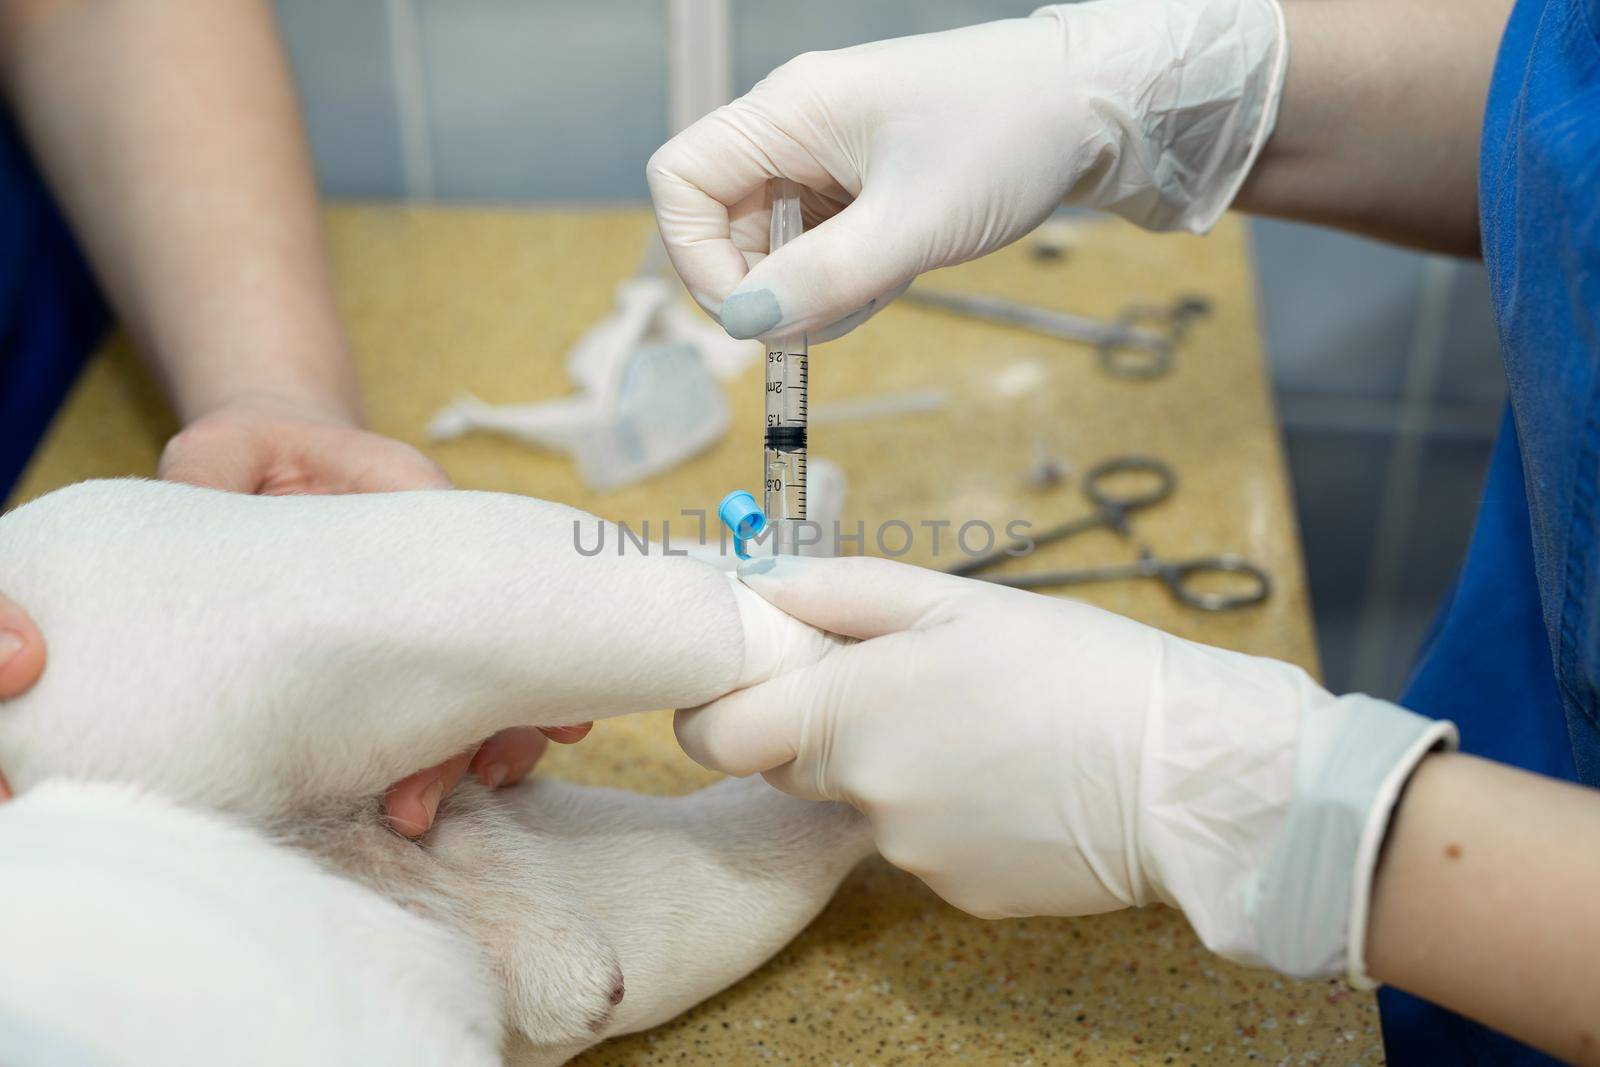 Close up veterinarian giving an injection to a dog at hospital